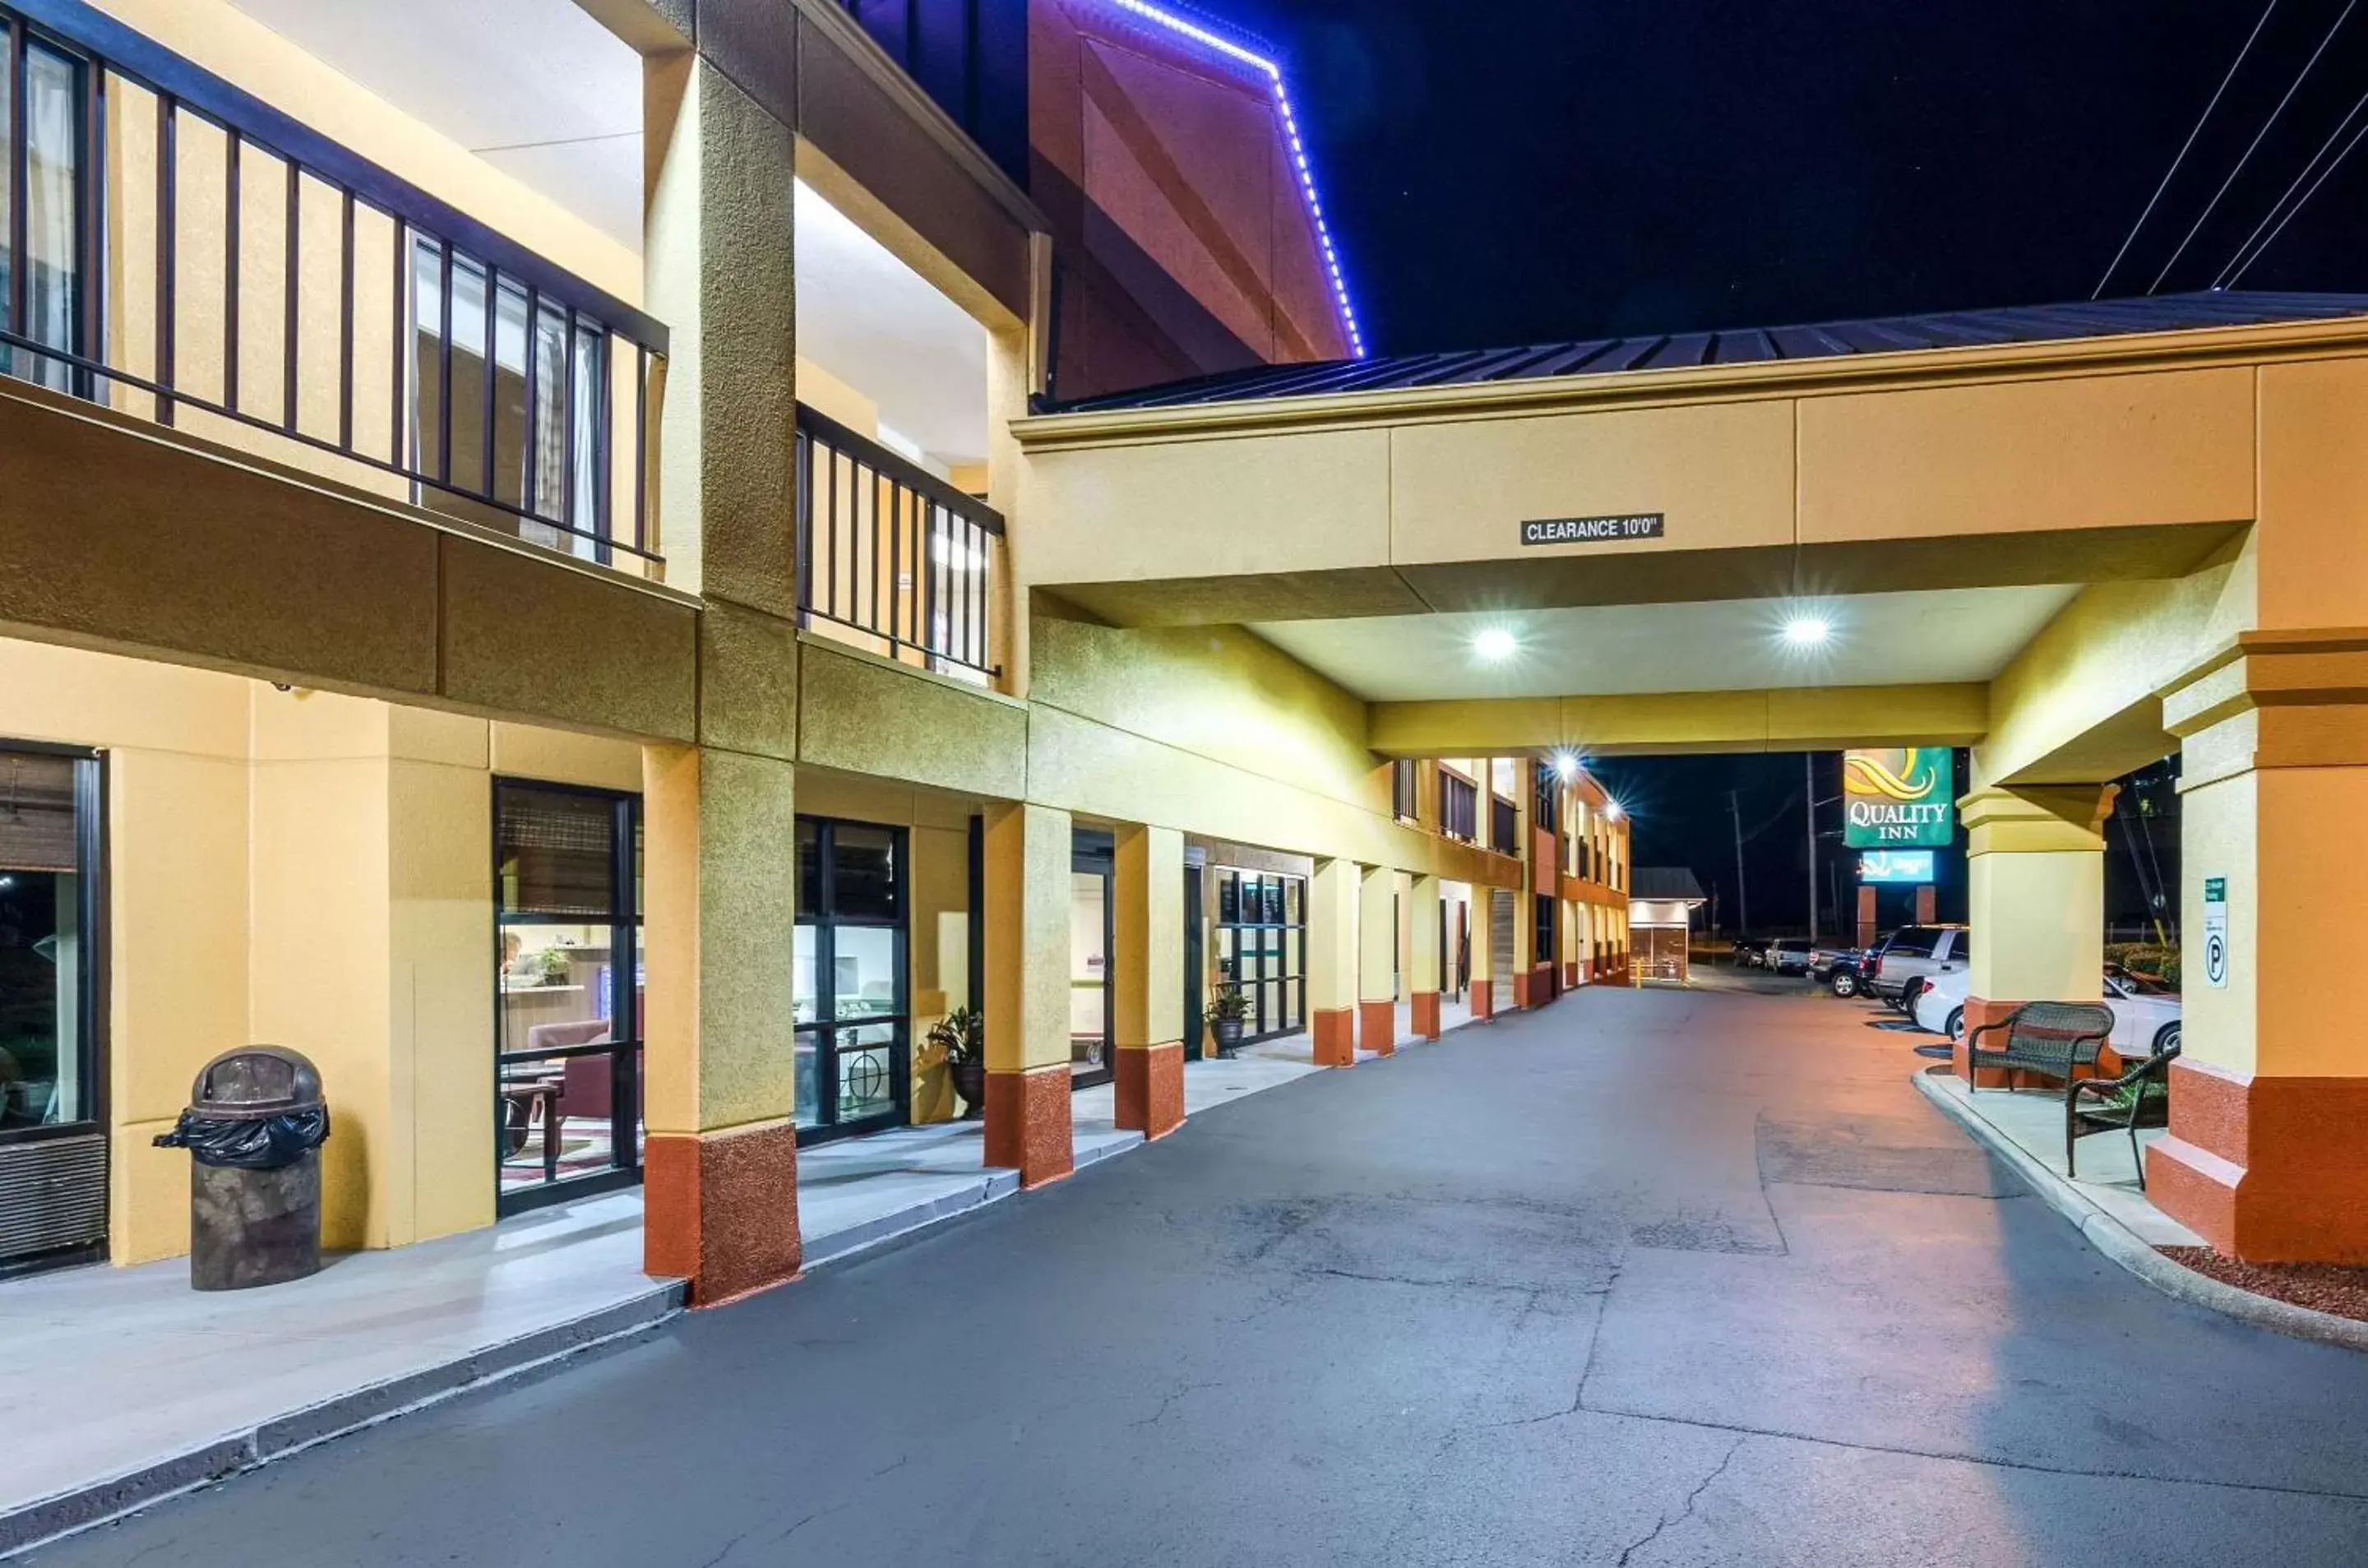 Property building in Quality Inn Tanglewood